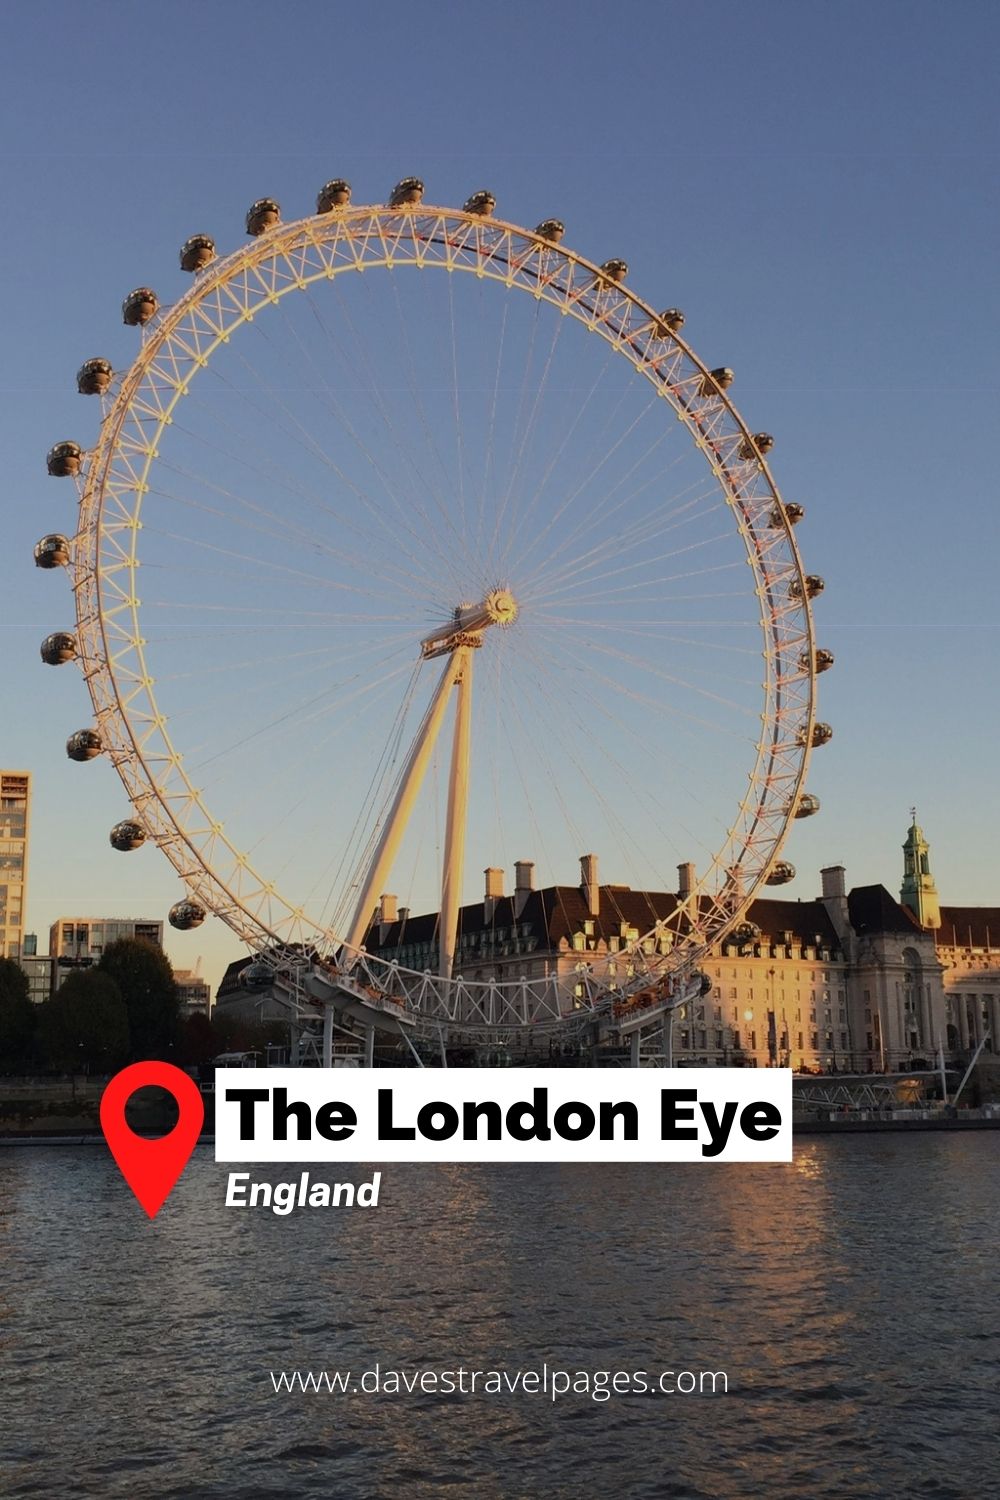 The London Eye: Famous monument in Europe